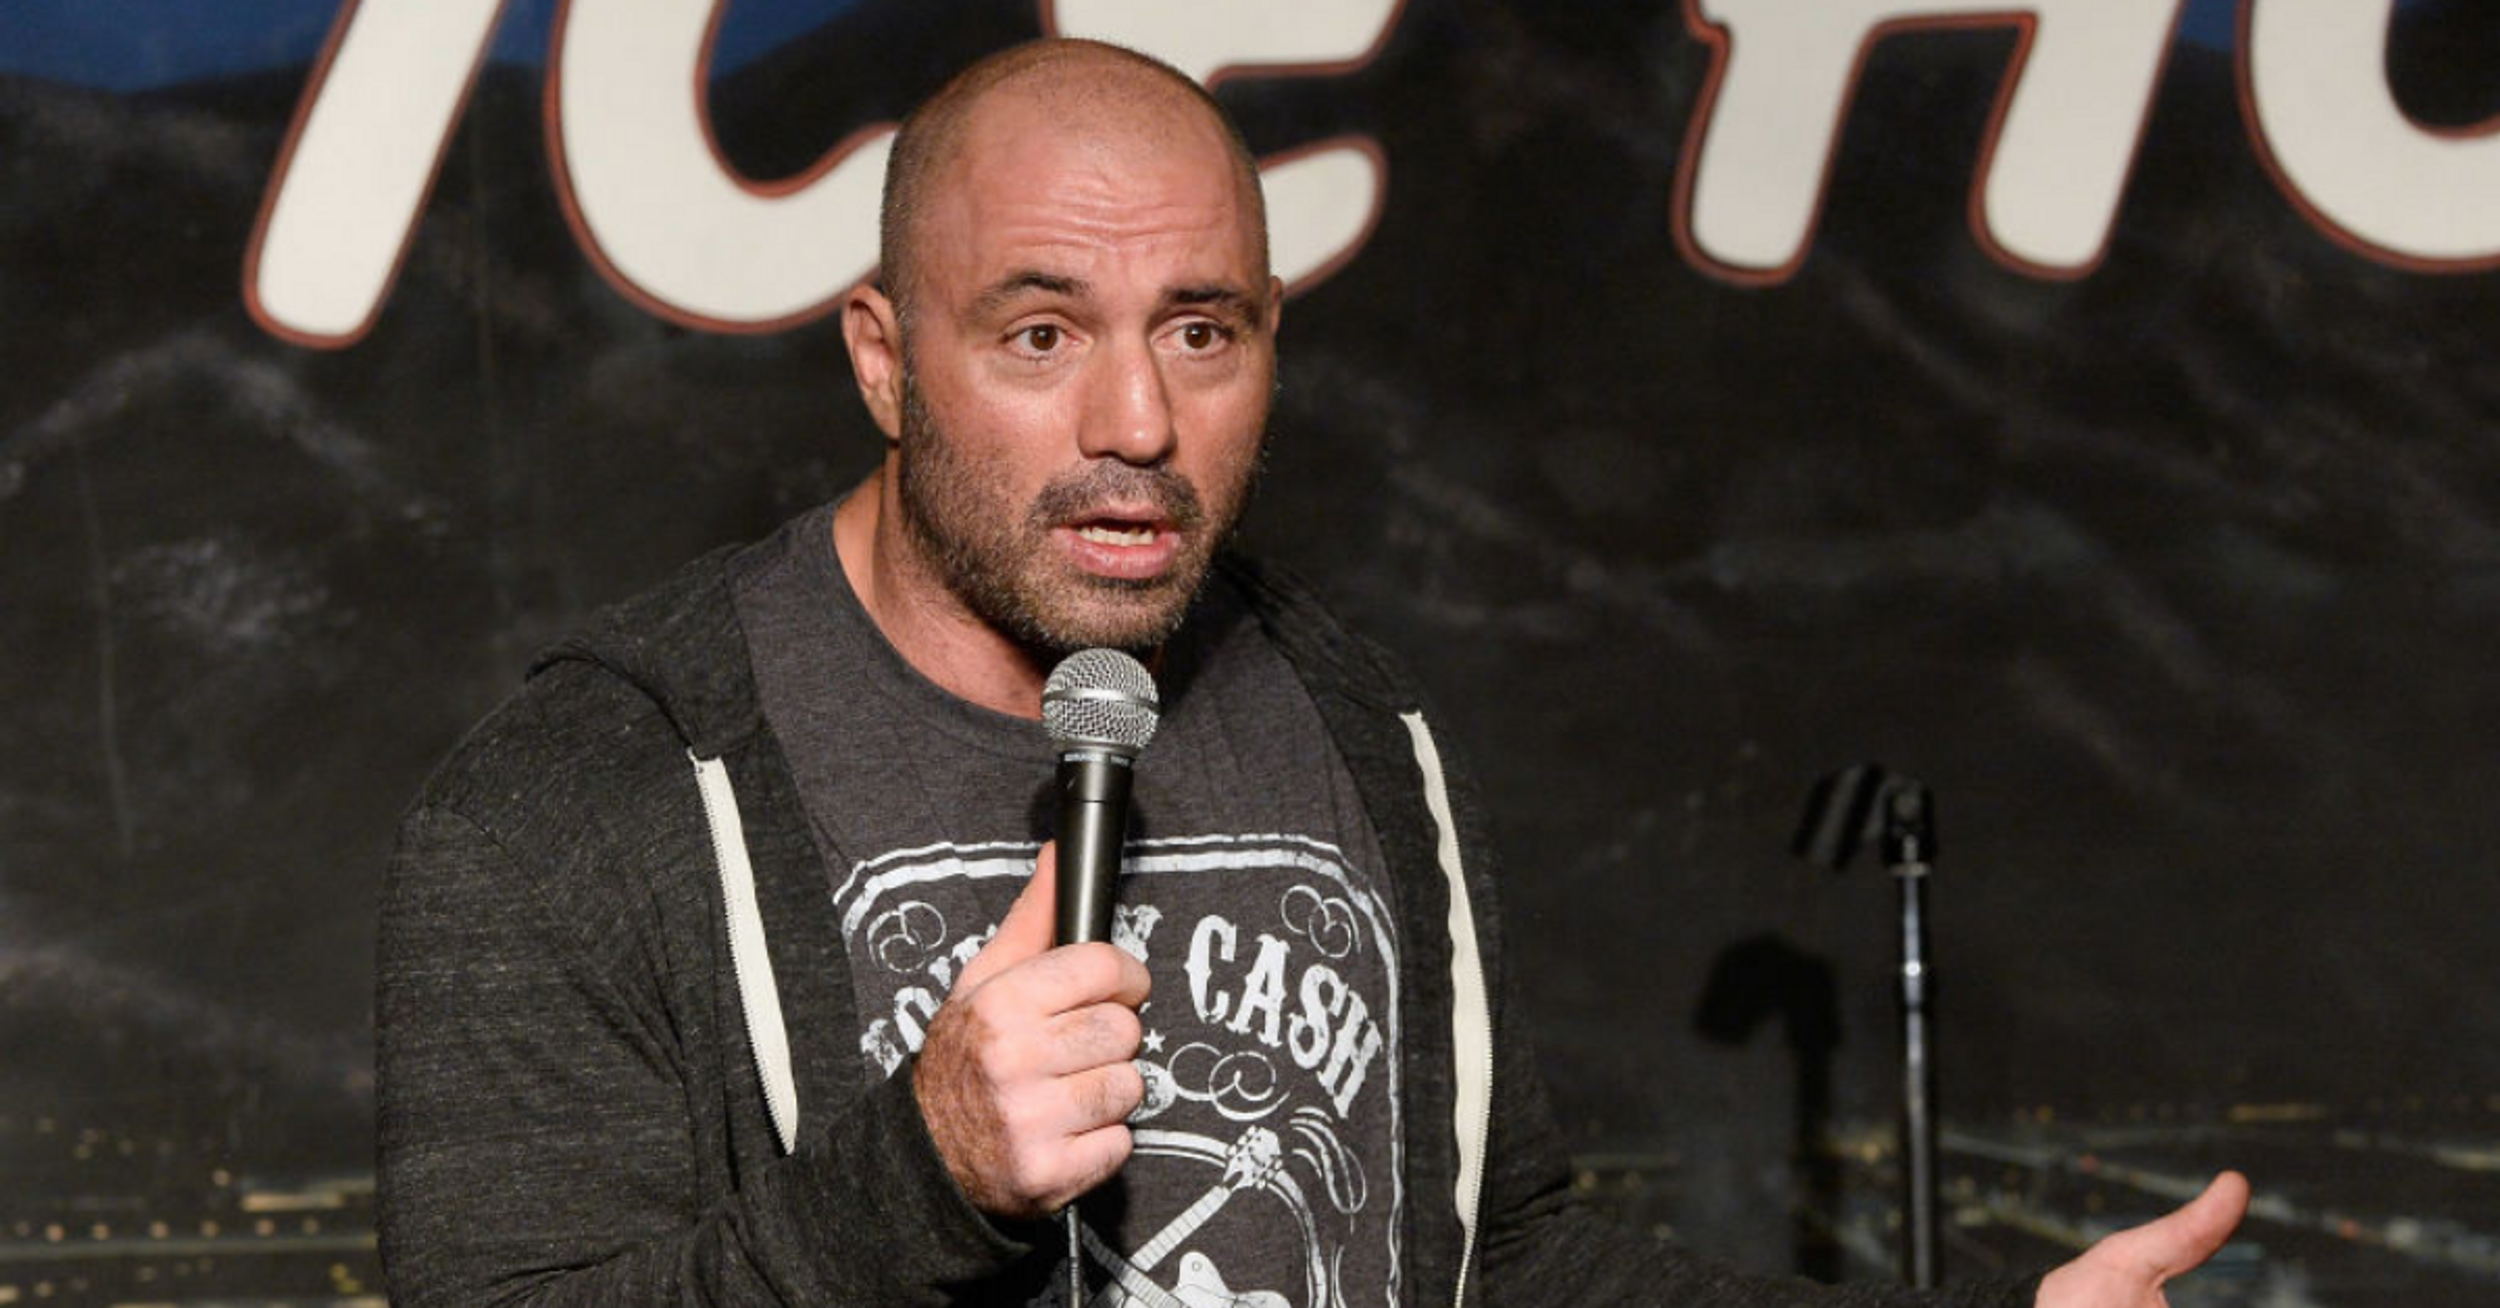 Joe Rogan Tweets False Story About Virus Just Hours After Apologizing For Spreading Misinformation